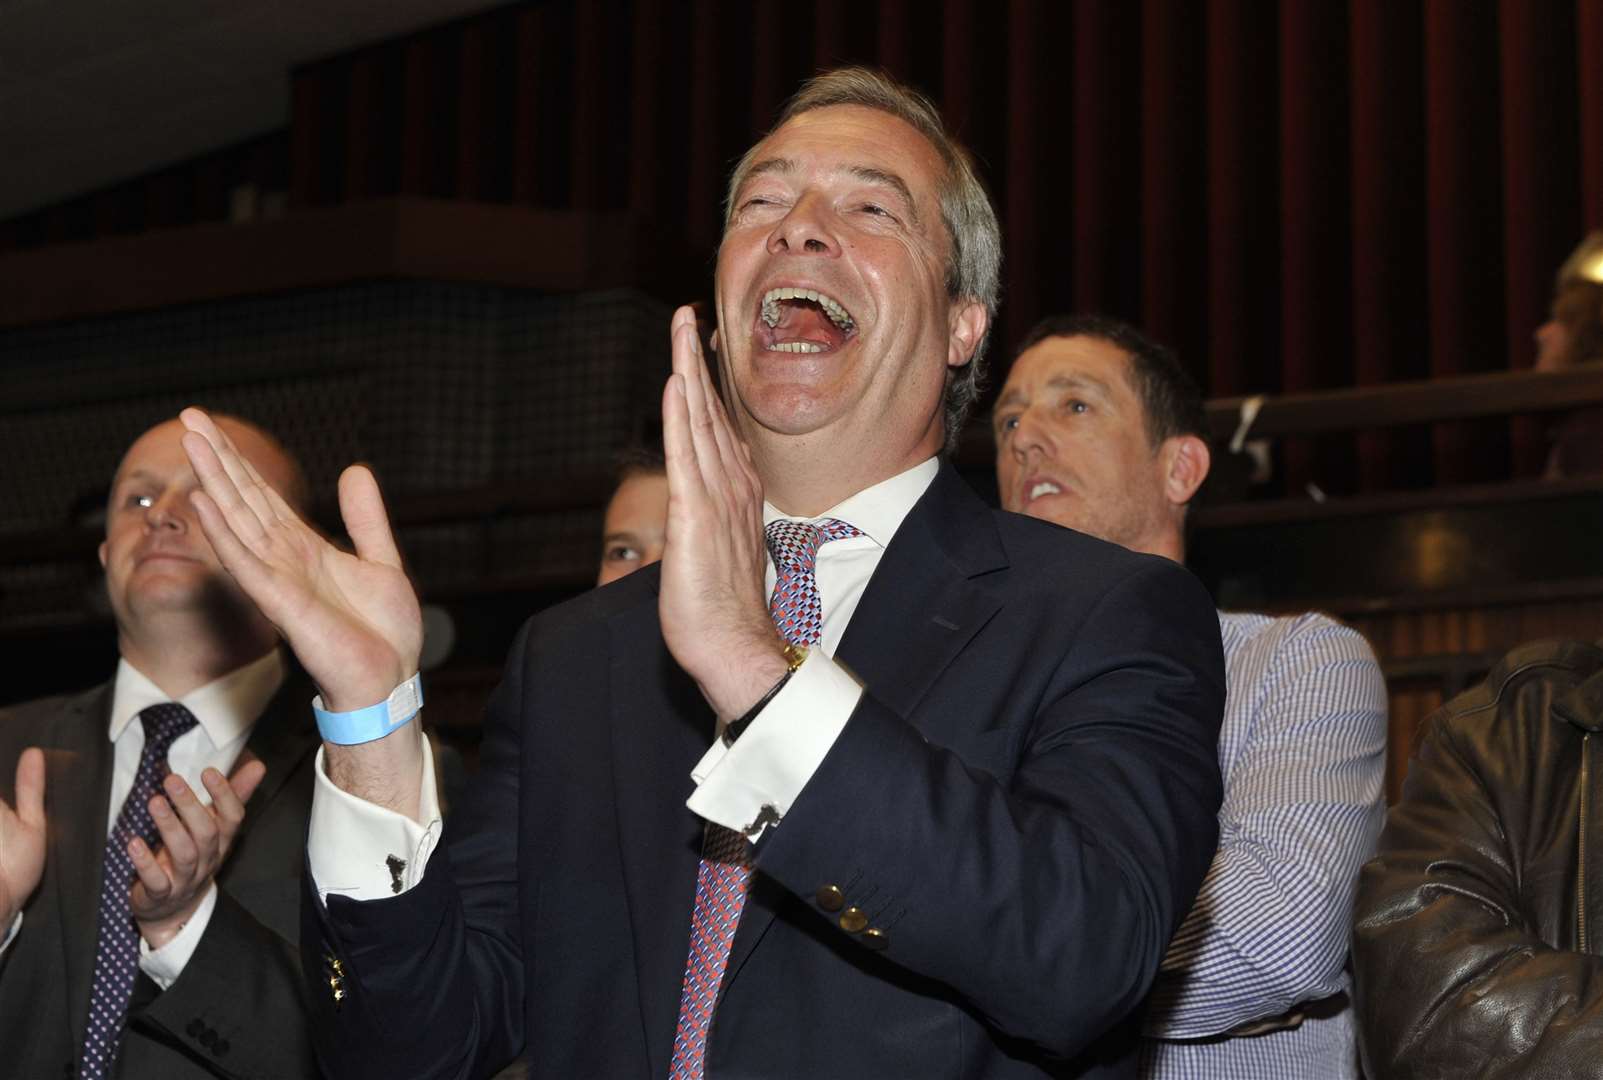 Happier days for Ukip as Nigel Farage celebrates a council election victory in Thanet